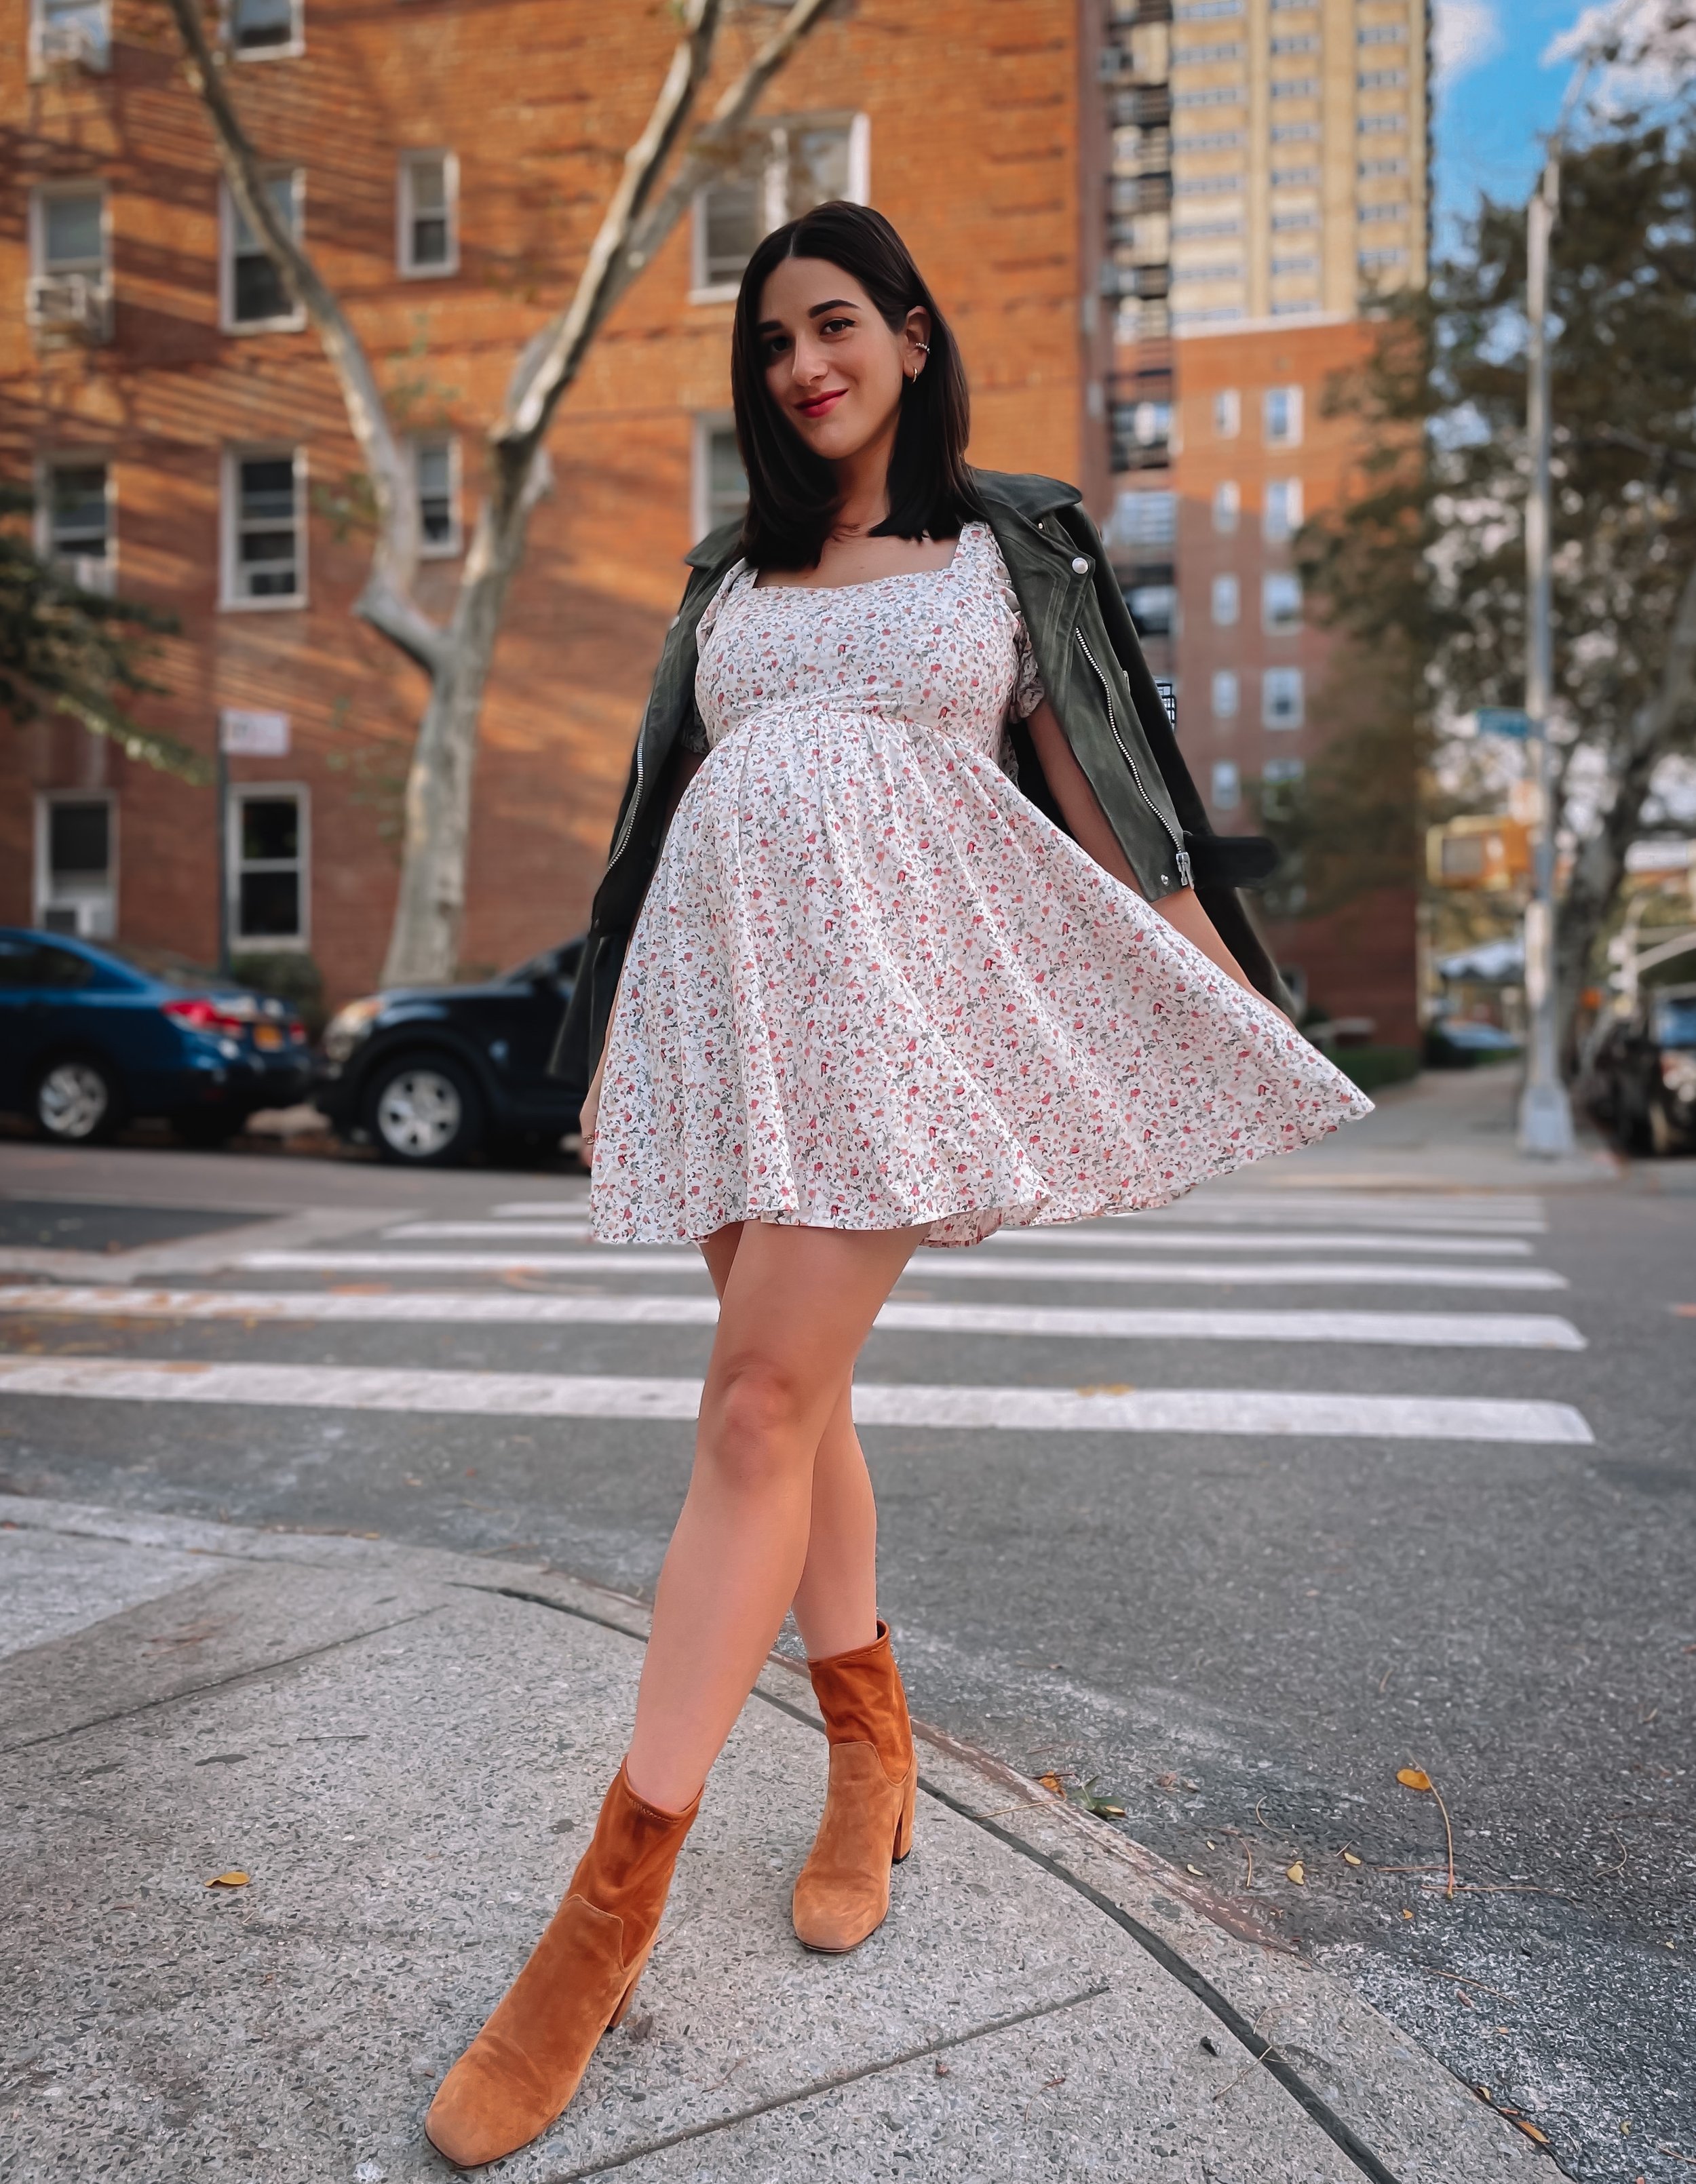 Floral Dress Tan Booties Esther Santer NYC Street Style Bump Friendly Fashion Maternity Look OOTD Olive Green Moto Jacket What To Wear Fall Pregnancy Baby Get Dressed Bumpdate IVF Success Feminine Women New York City Girl Tripod Photoshoot Shoes Boots.JPG